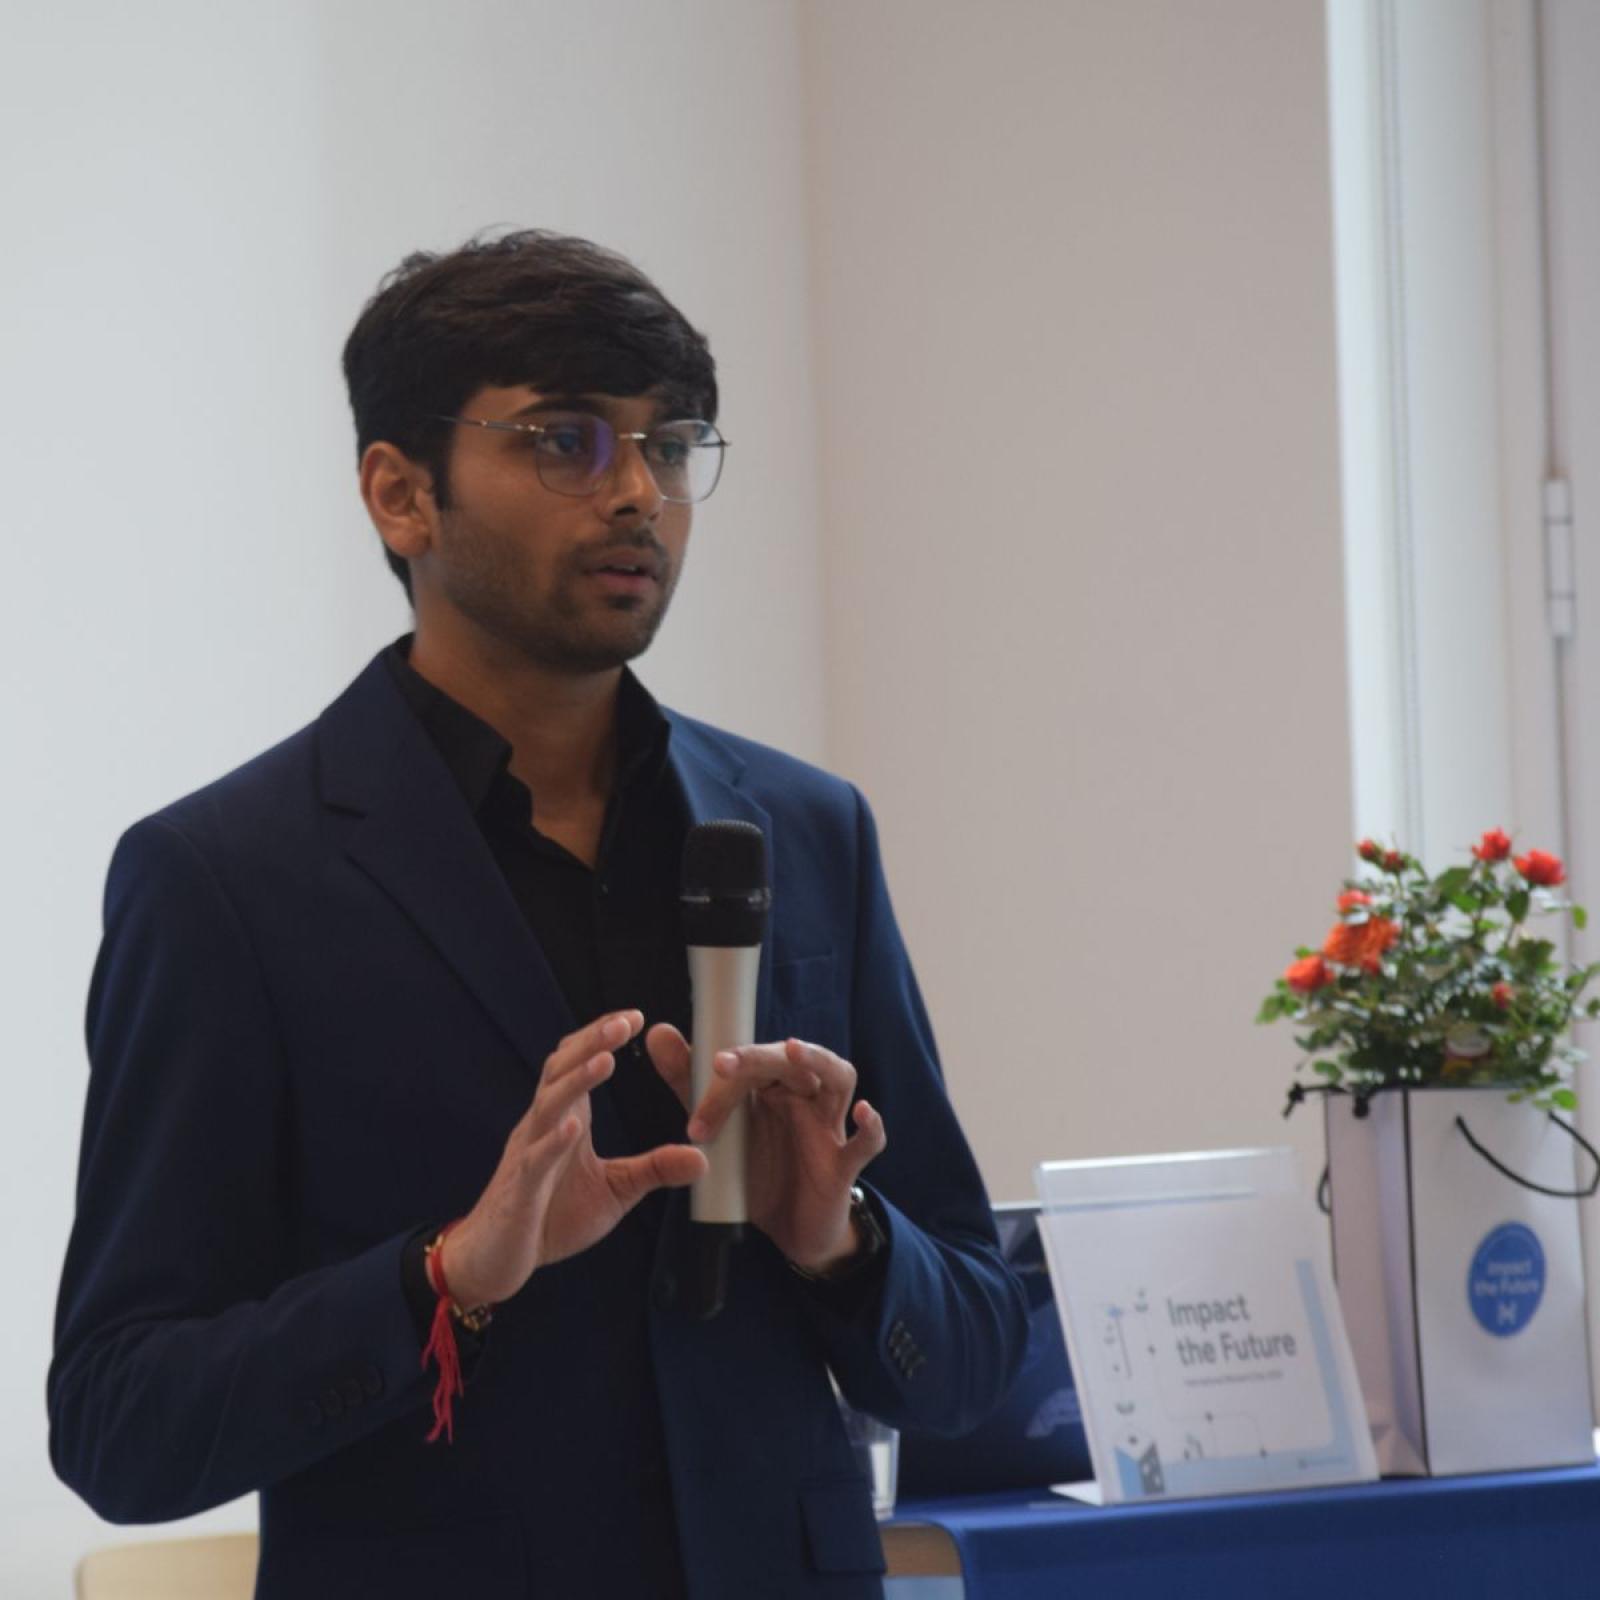  student Om Gaikhe holding a microphone while giving a speech during an event presentation.